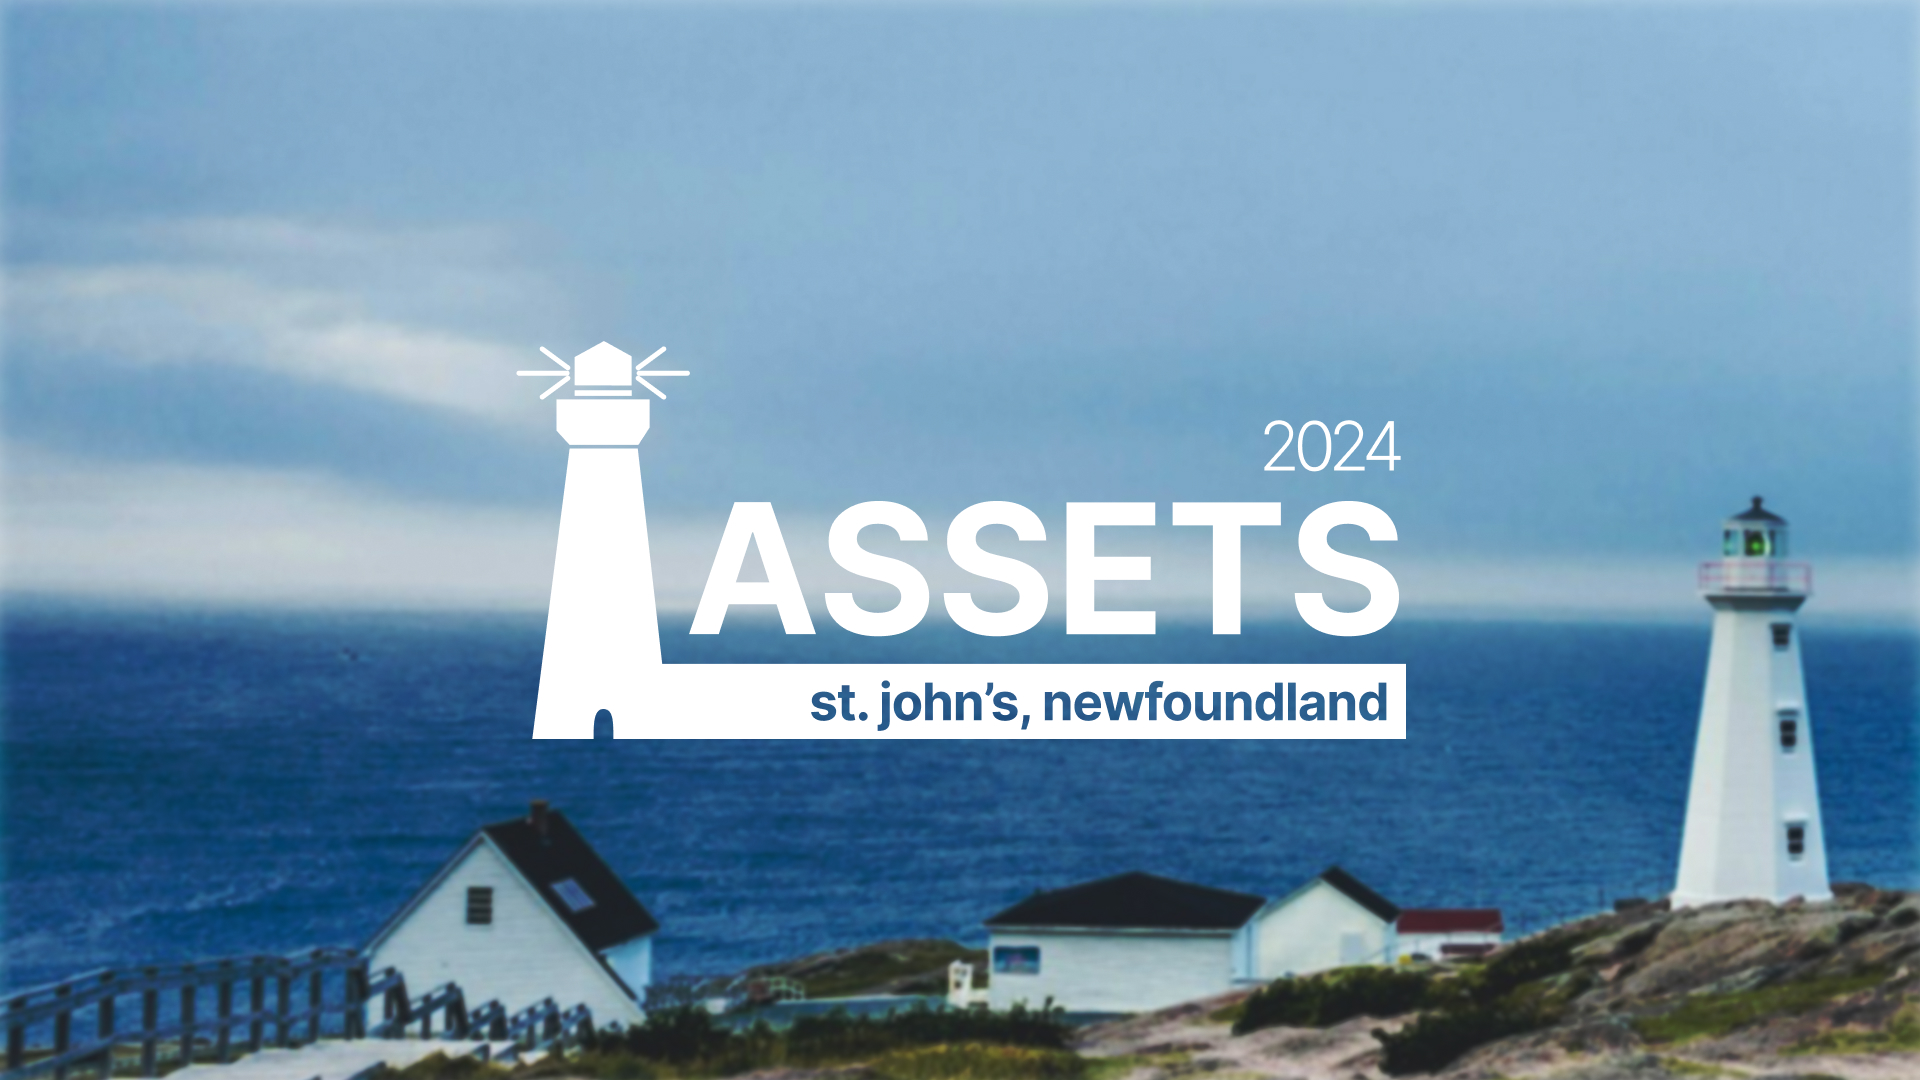 A slightly blurred out white lighthouse in the background, on a clifftop with a house. In the foreground is the ASSETS 2024 logo. It is displaying a lighthouse (similar to the one in the background to the left and the words 'assets' in the middle.